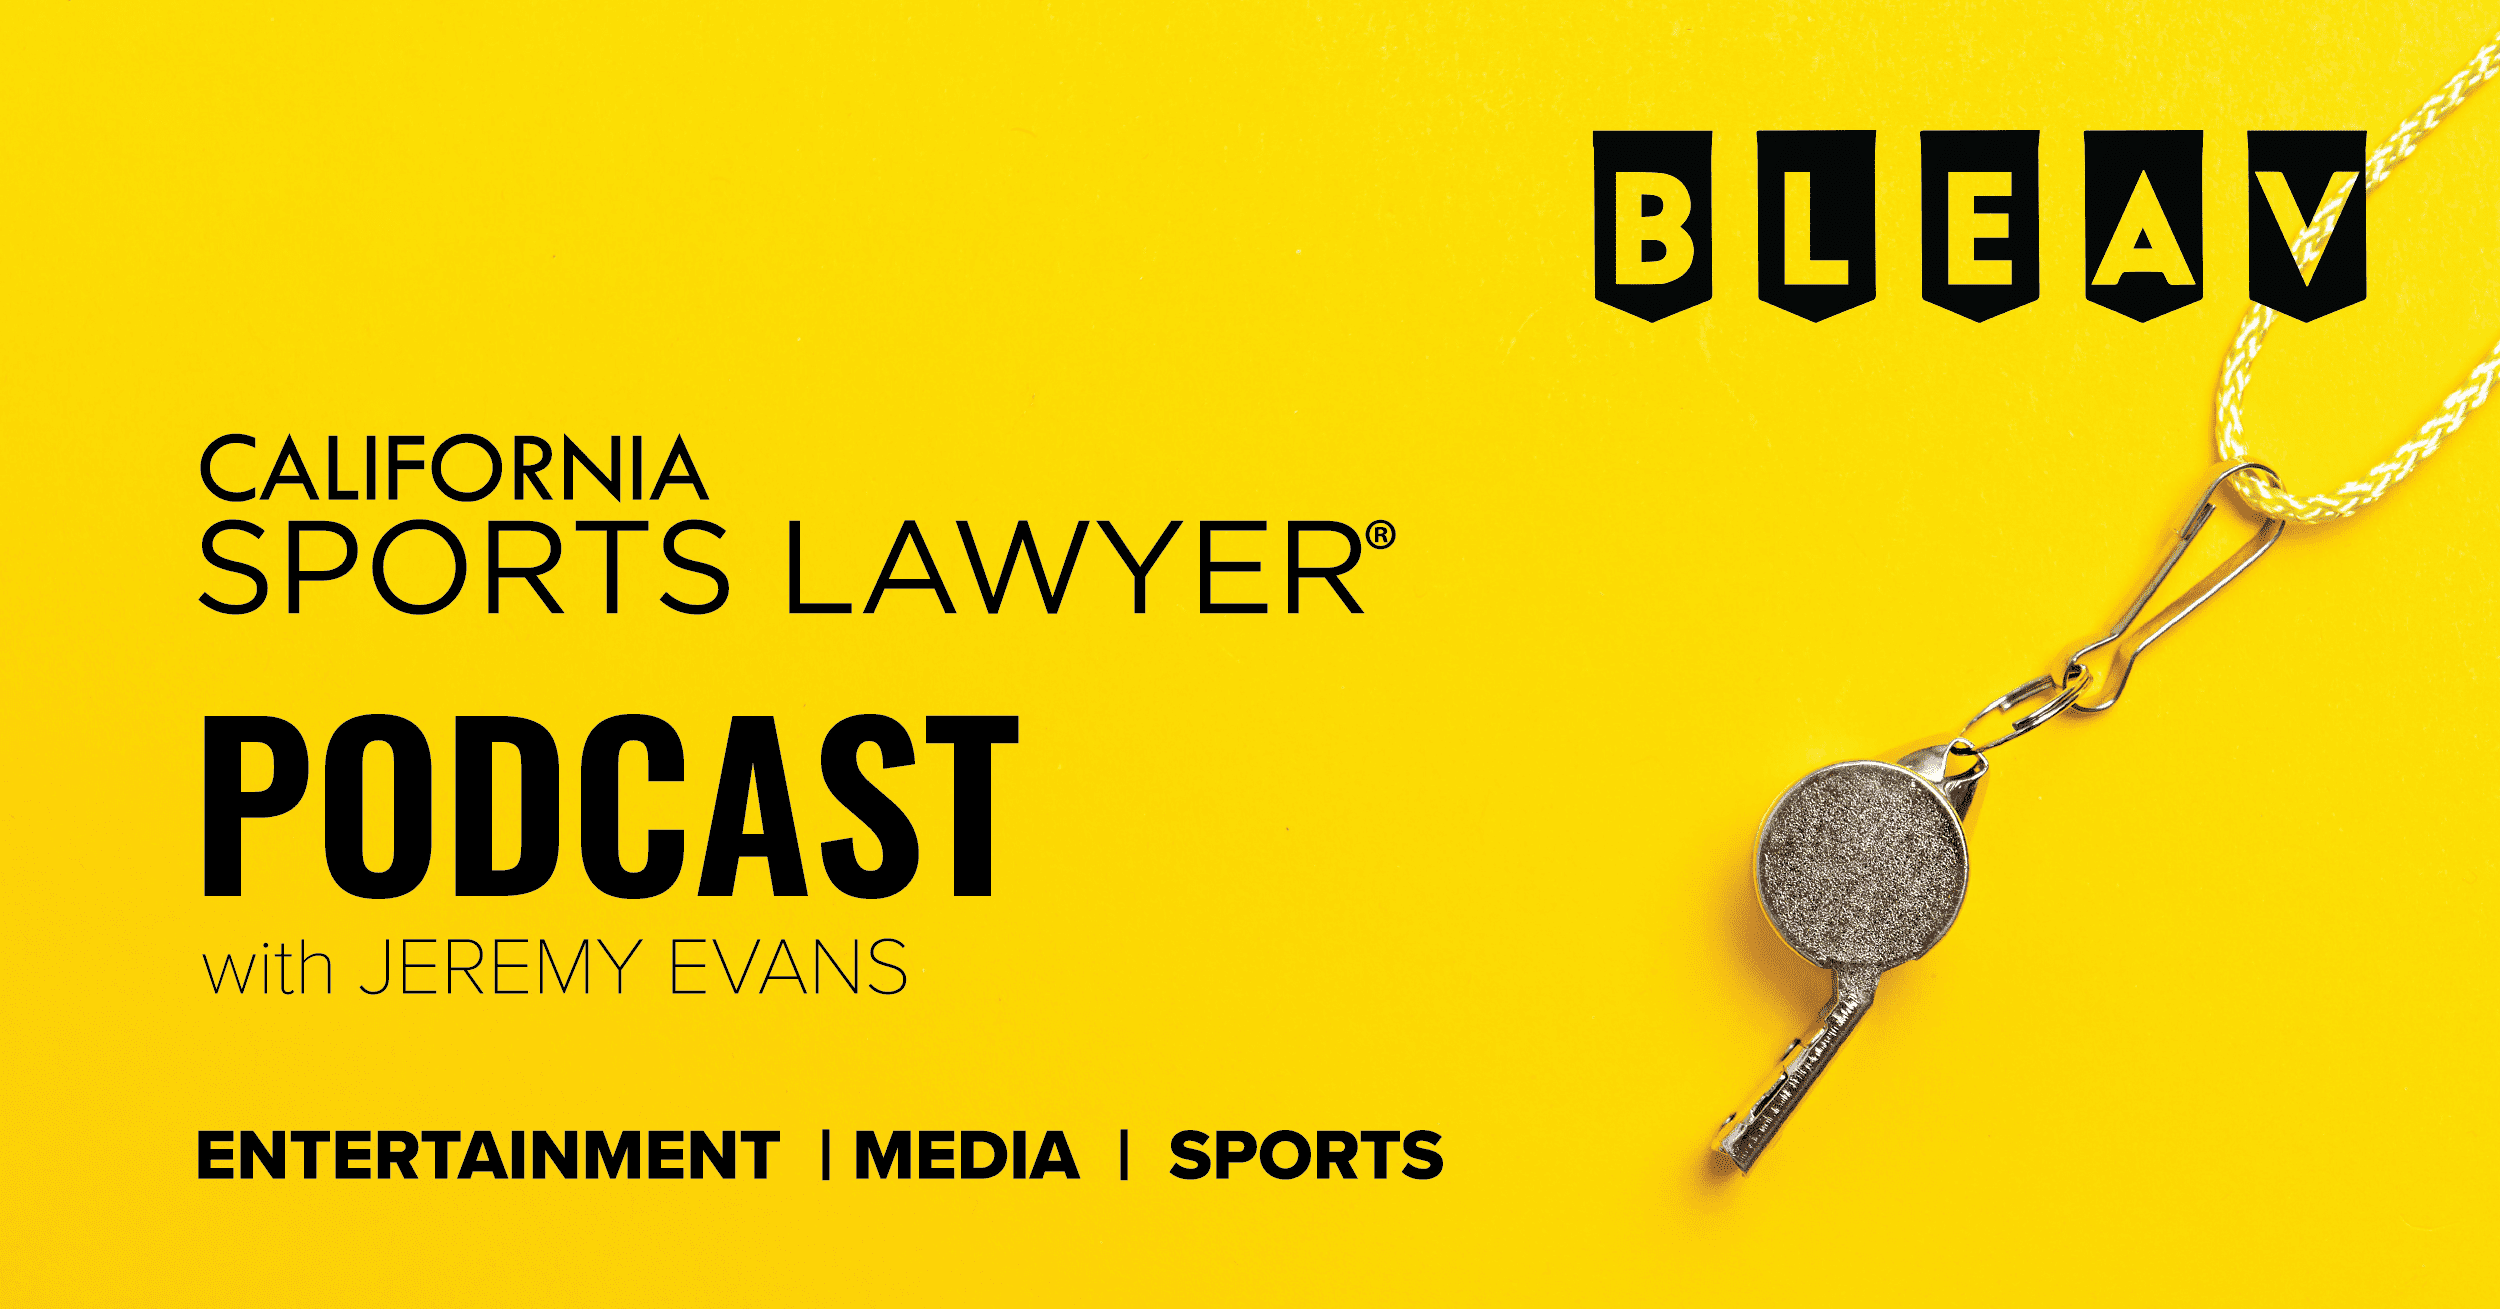 California Sports Lawyer® Podcast with Jeremy Evans: Disputes and Strikes Leading to More Streaming and Collaboration